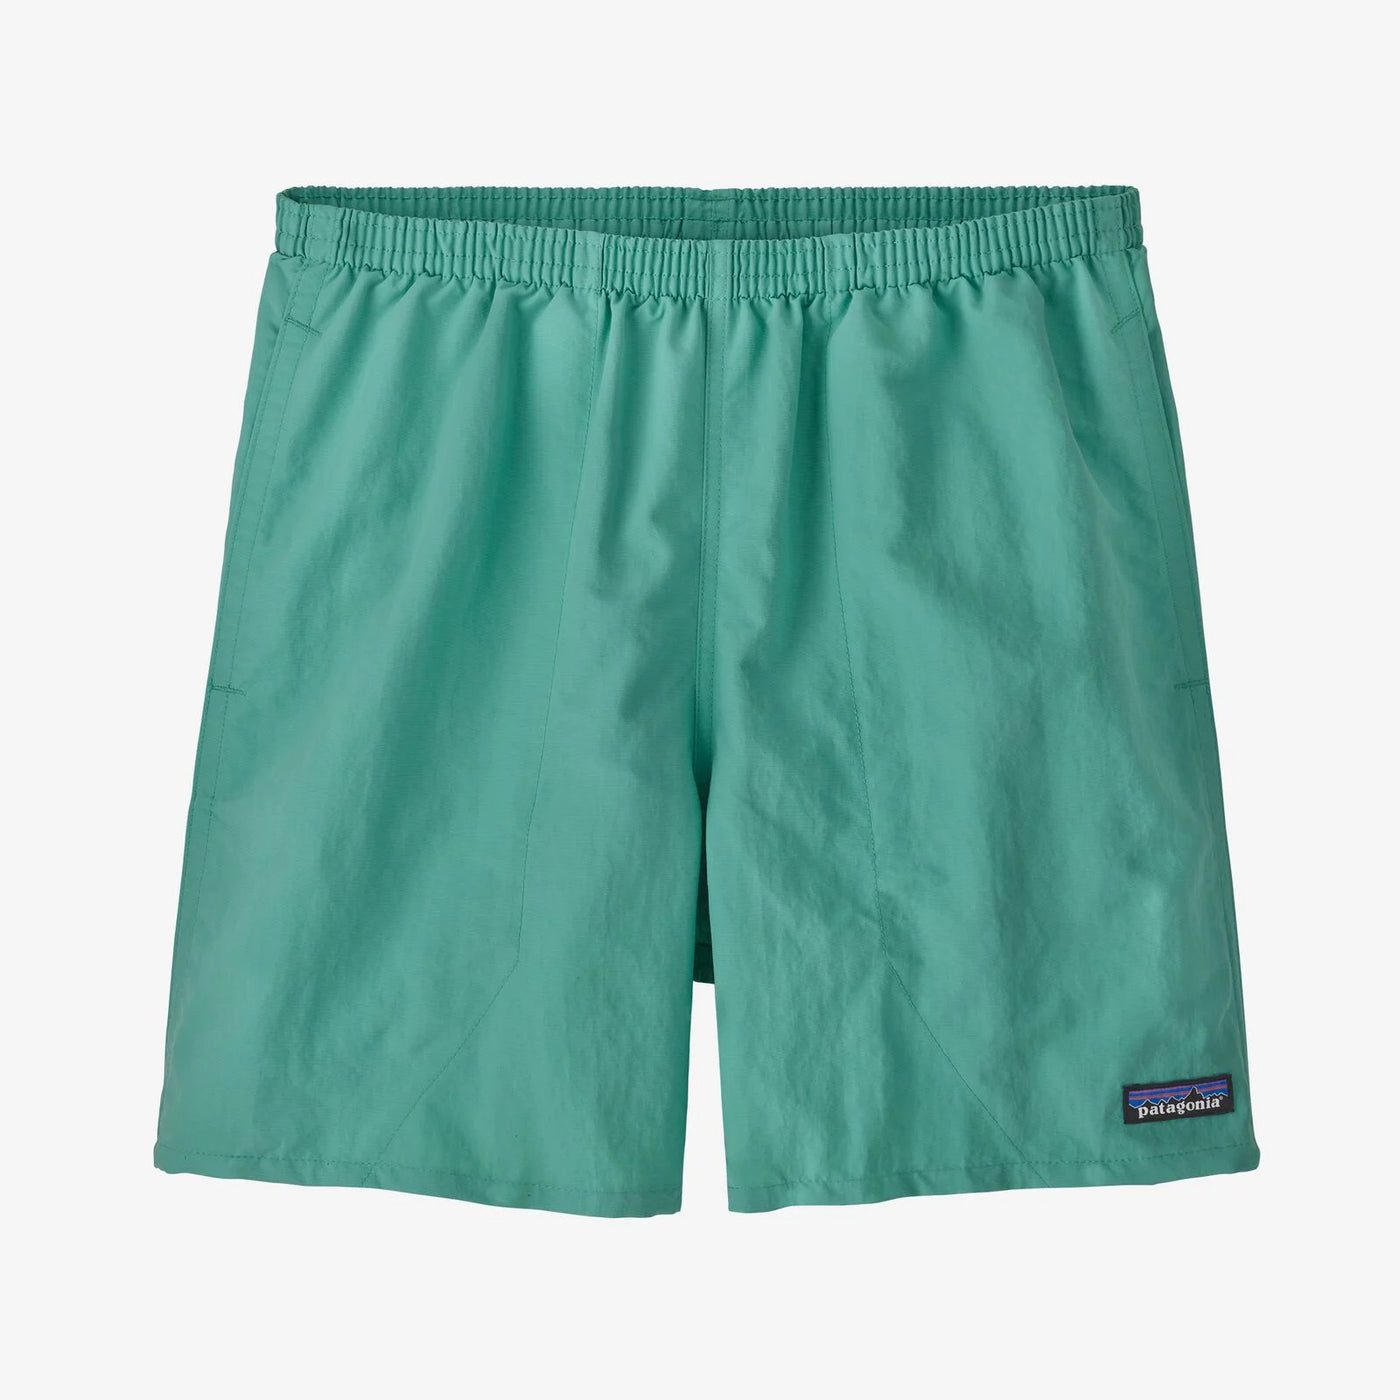 Patagonia Men's Baggies Shorts - 5"-Men's Clothing-Fresh Teal-XS-Kevin's Fine Outdoor Gear & Apparel